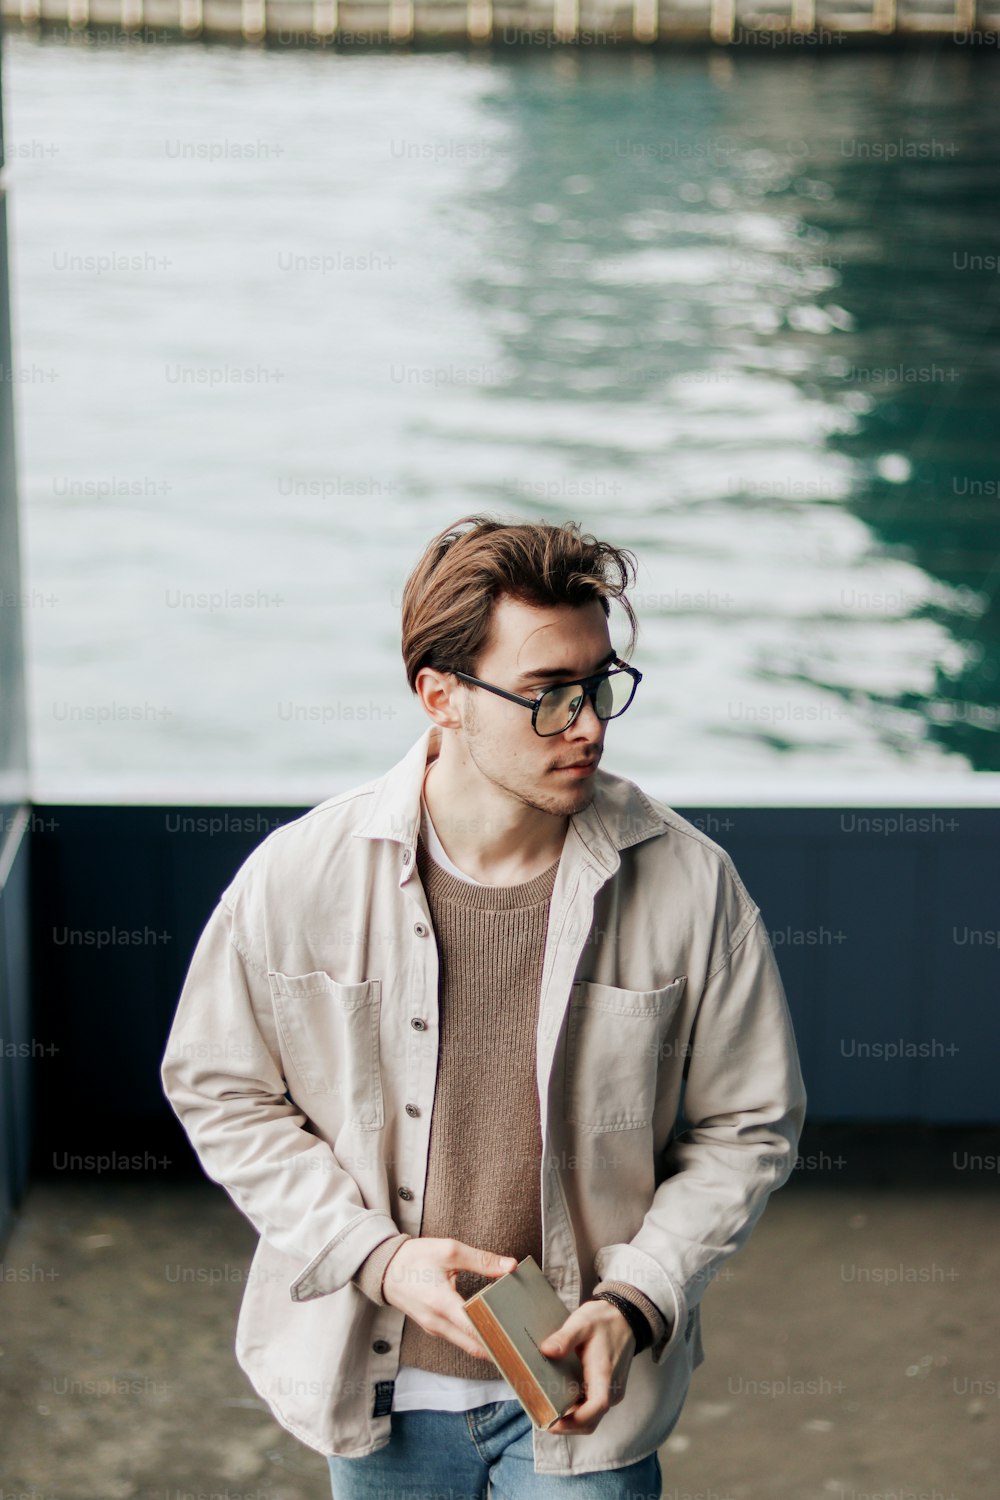 a man with glasses standing next to a body of water